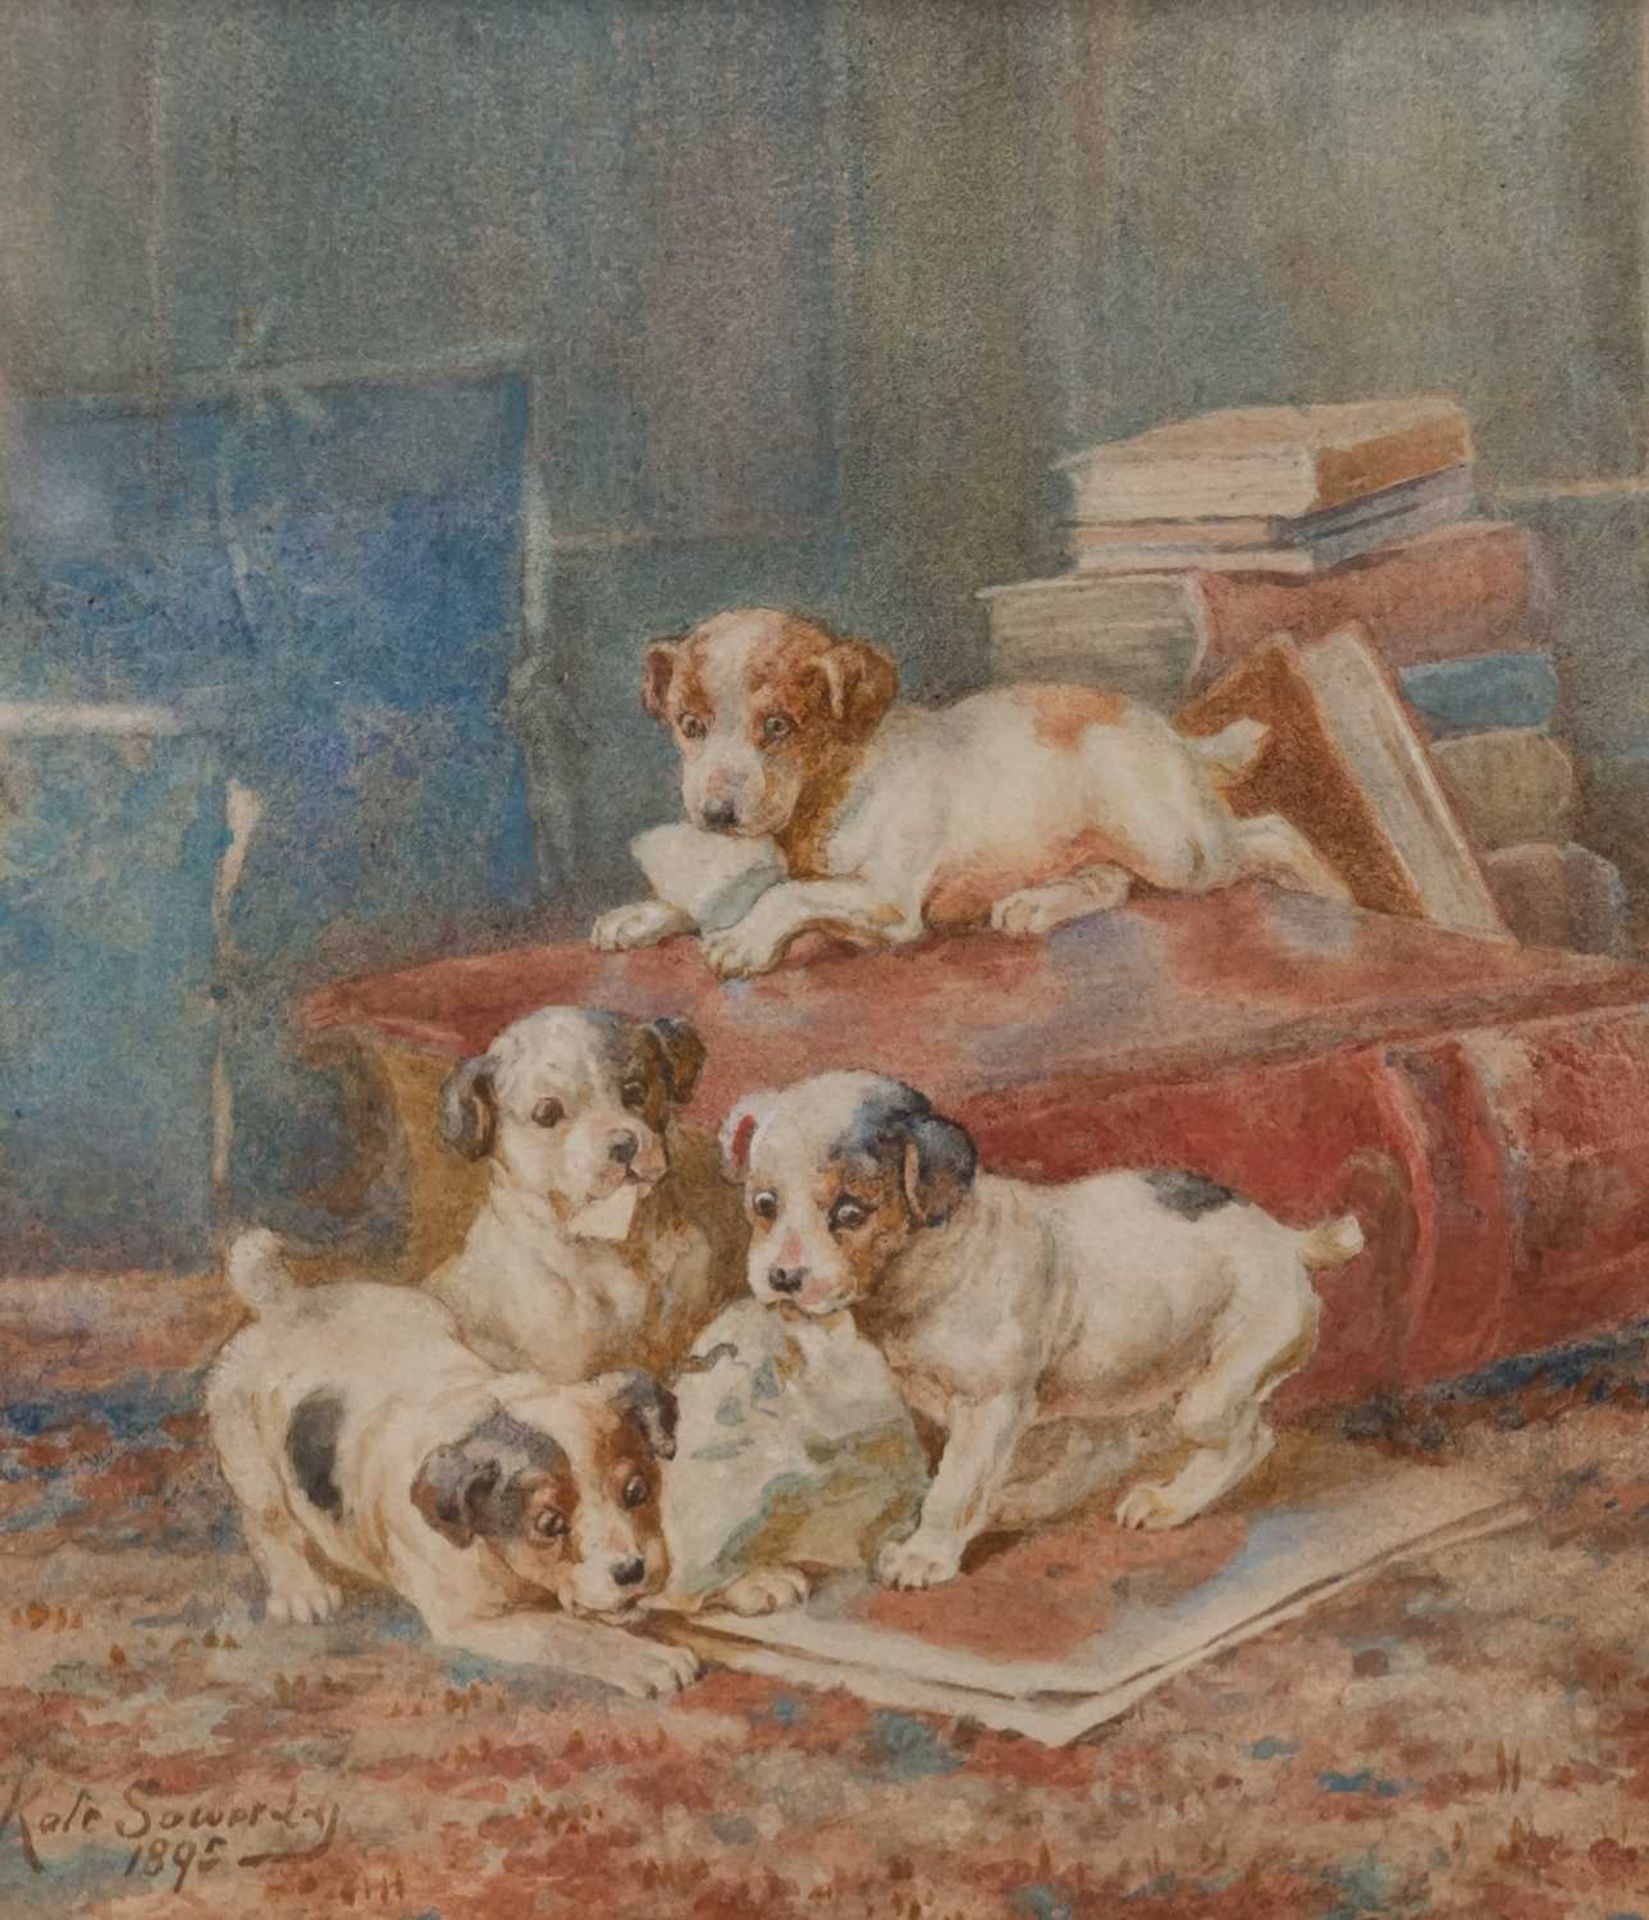 KATE SOWERBY (act 1883-1900) JACK RUSSELL PUPPIES